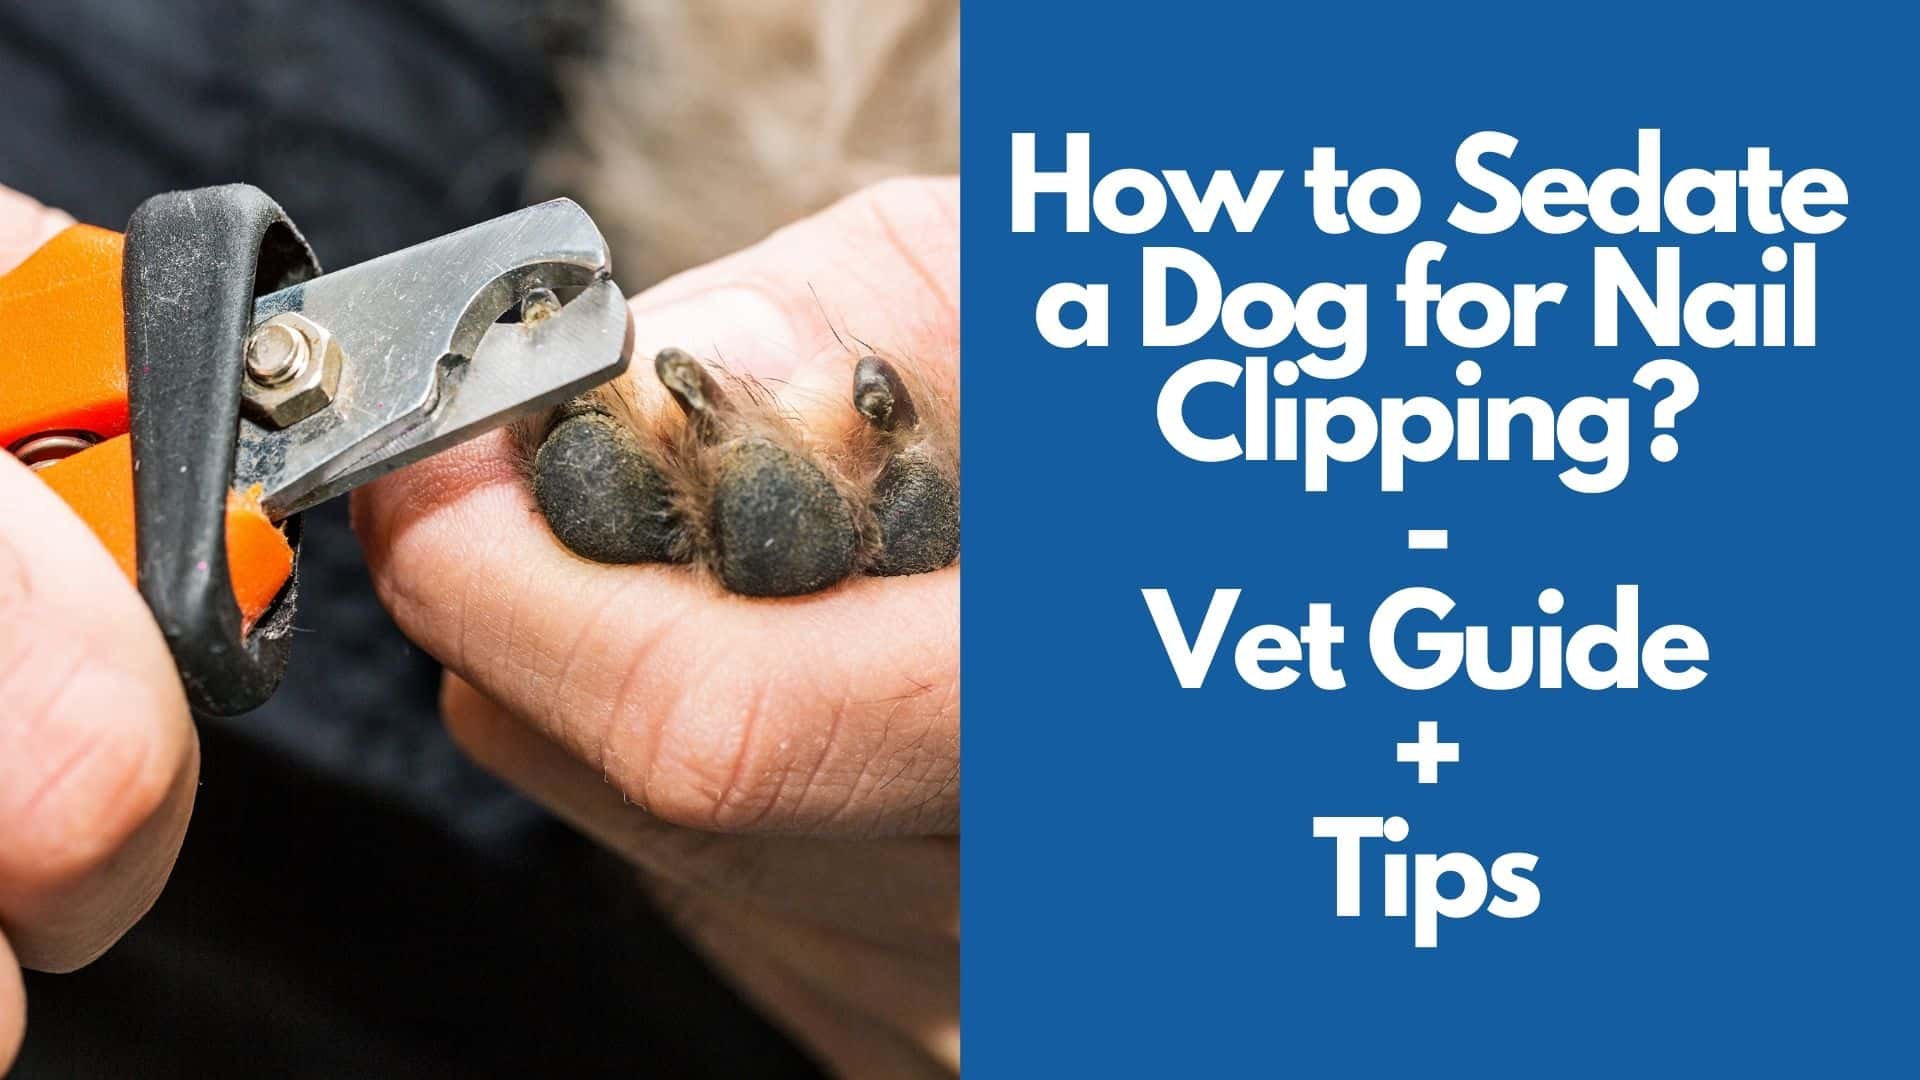 How to Sedate a Dog for Nail Clipping Vet Guide + Tips